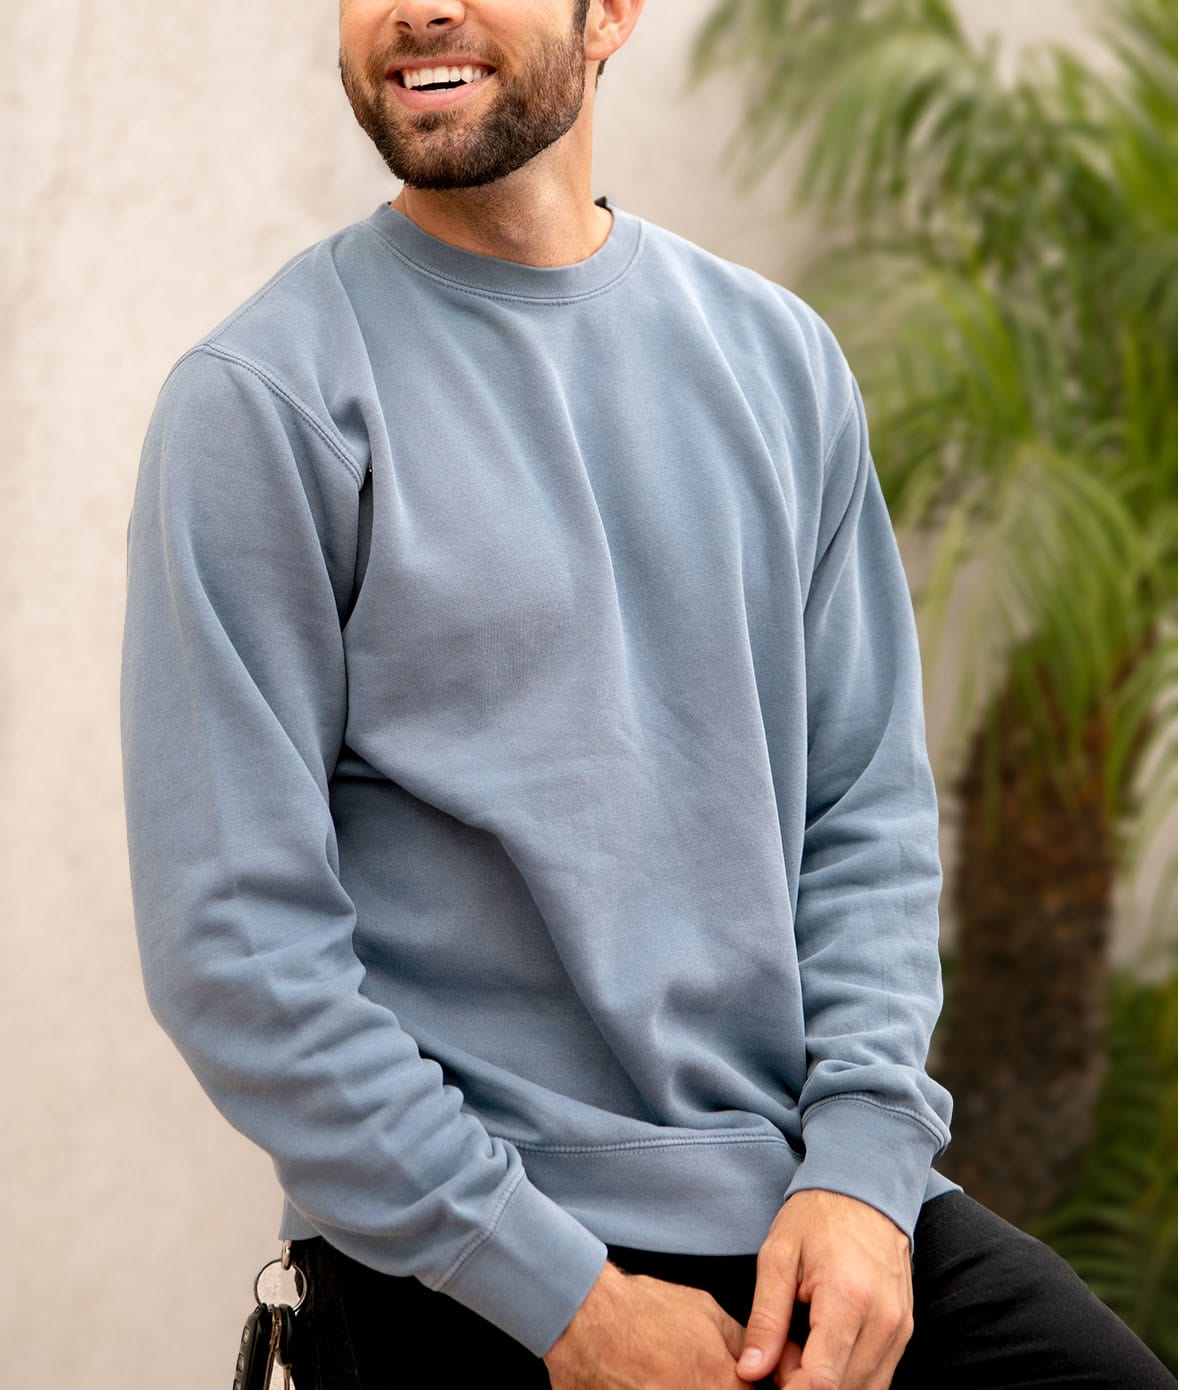 Men's Ridiculously Soft Pigment-Dyed Sweatshirt Worn by Model